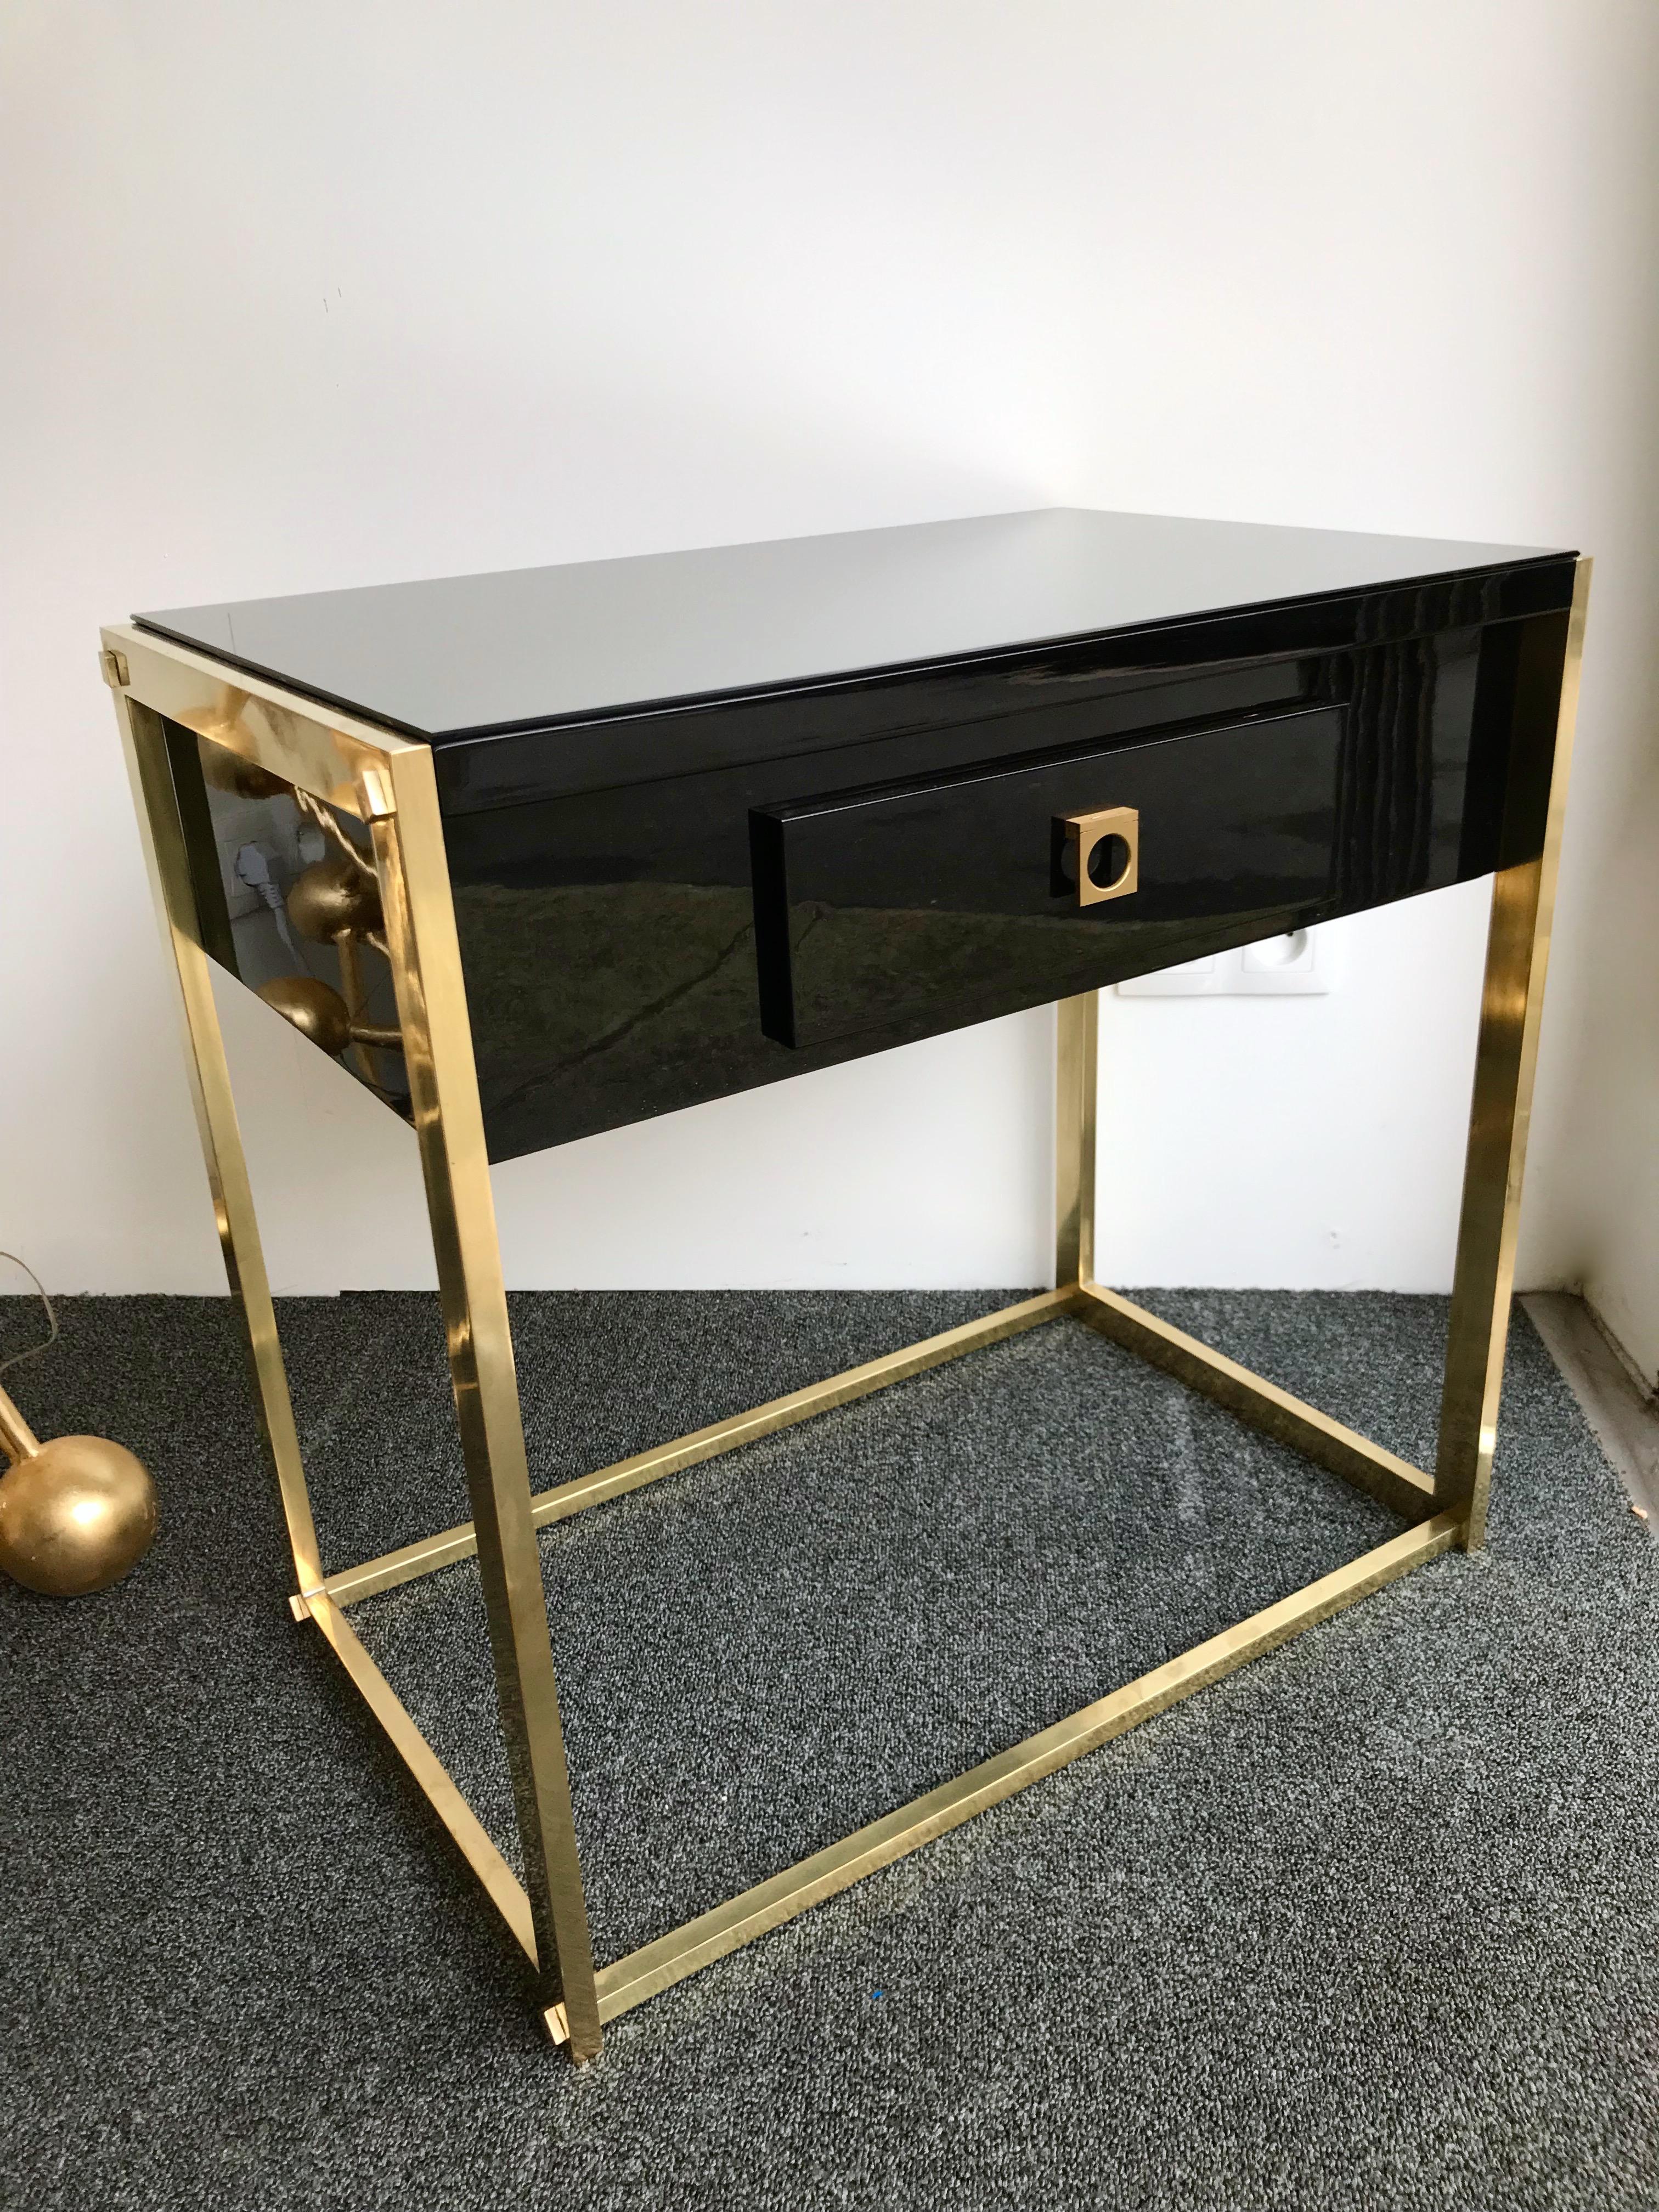 Rare model of lacquered and brass side end tables or nightstands by Guy Lefèvre for Maison Jansen Paris. Black lacquer, interesting brass feet with decorative screw elements, mirror glass top, wood interiors drawers. Famous manufacture like Baguès,